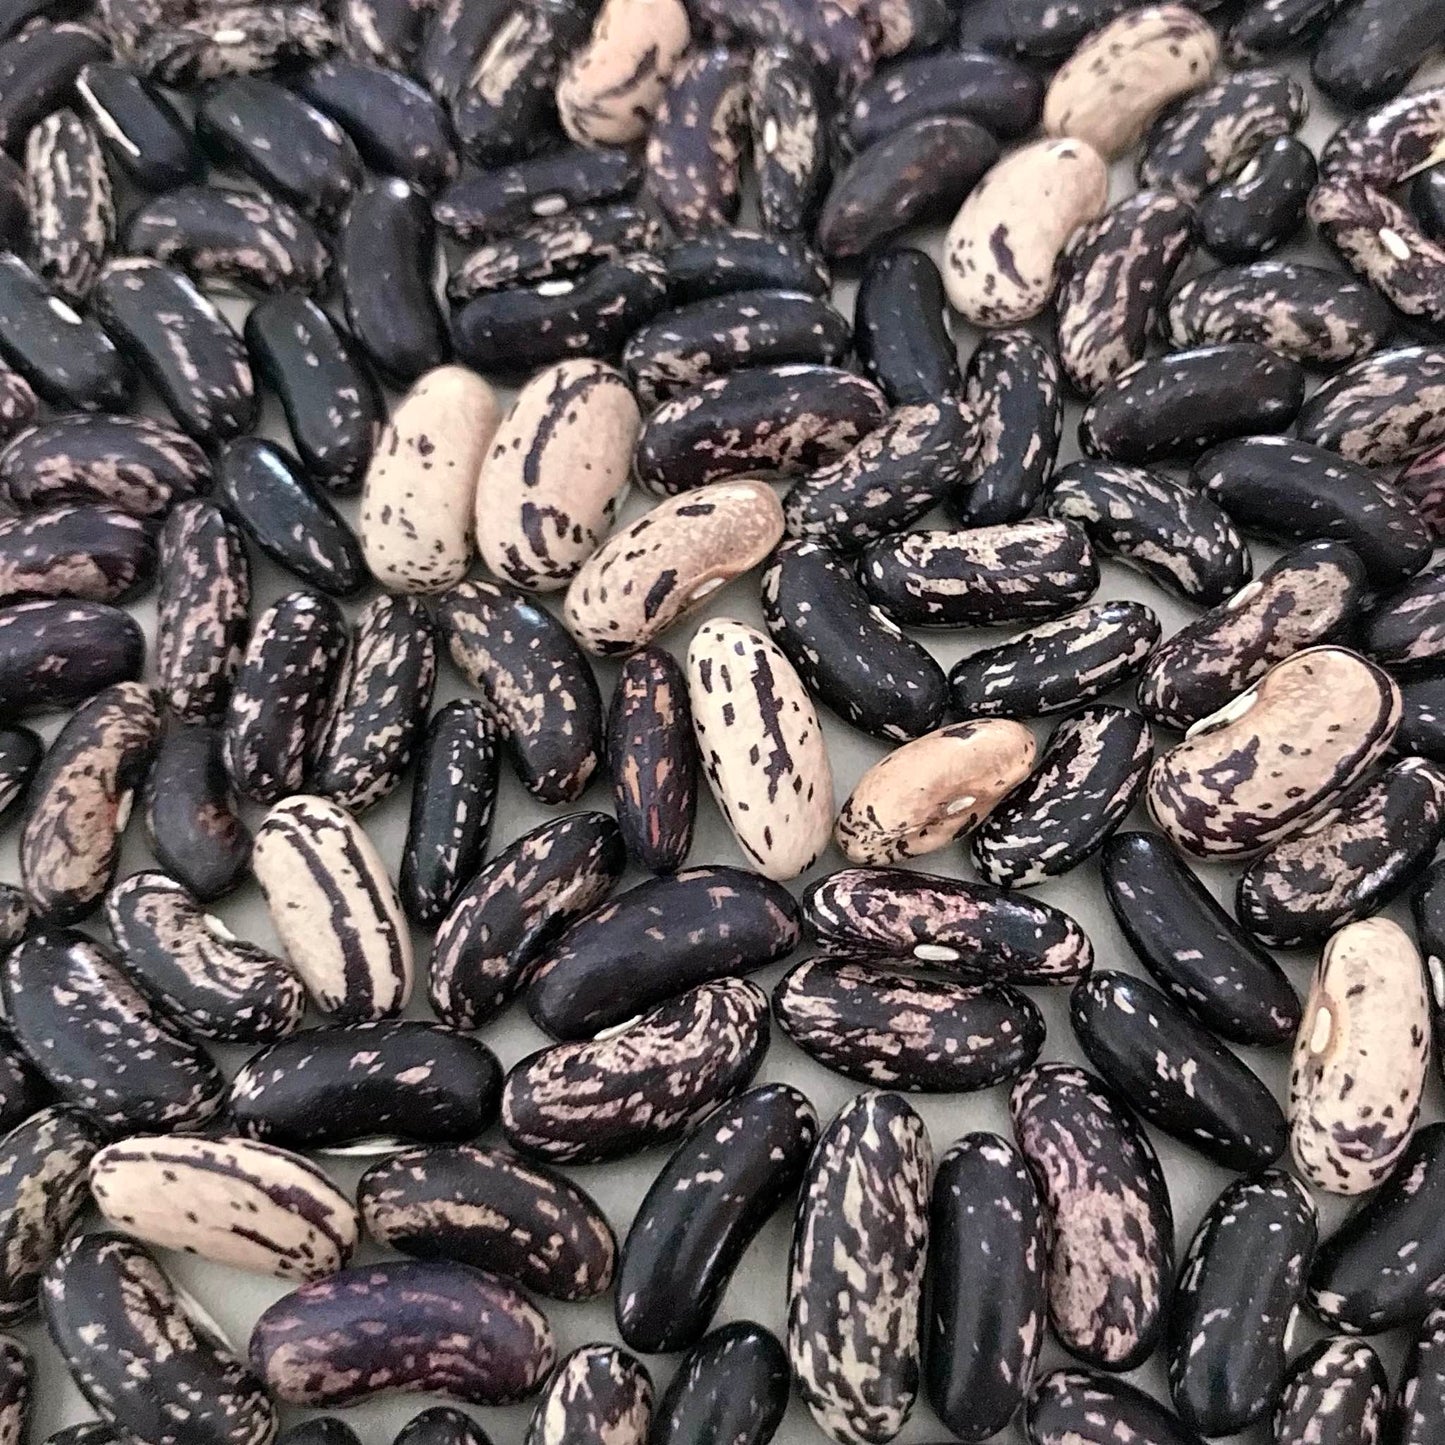 Closeup view of navy and beige dried beans.